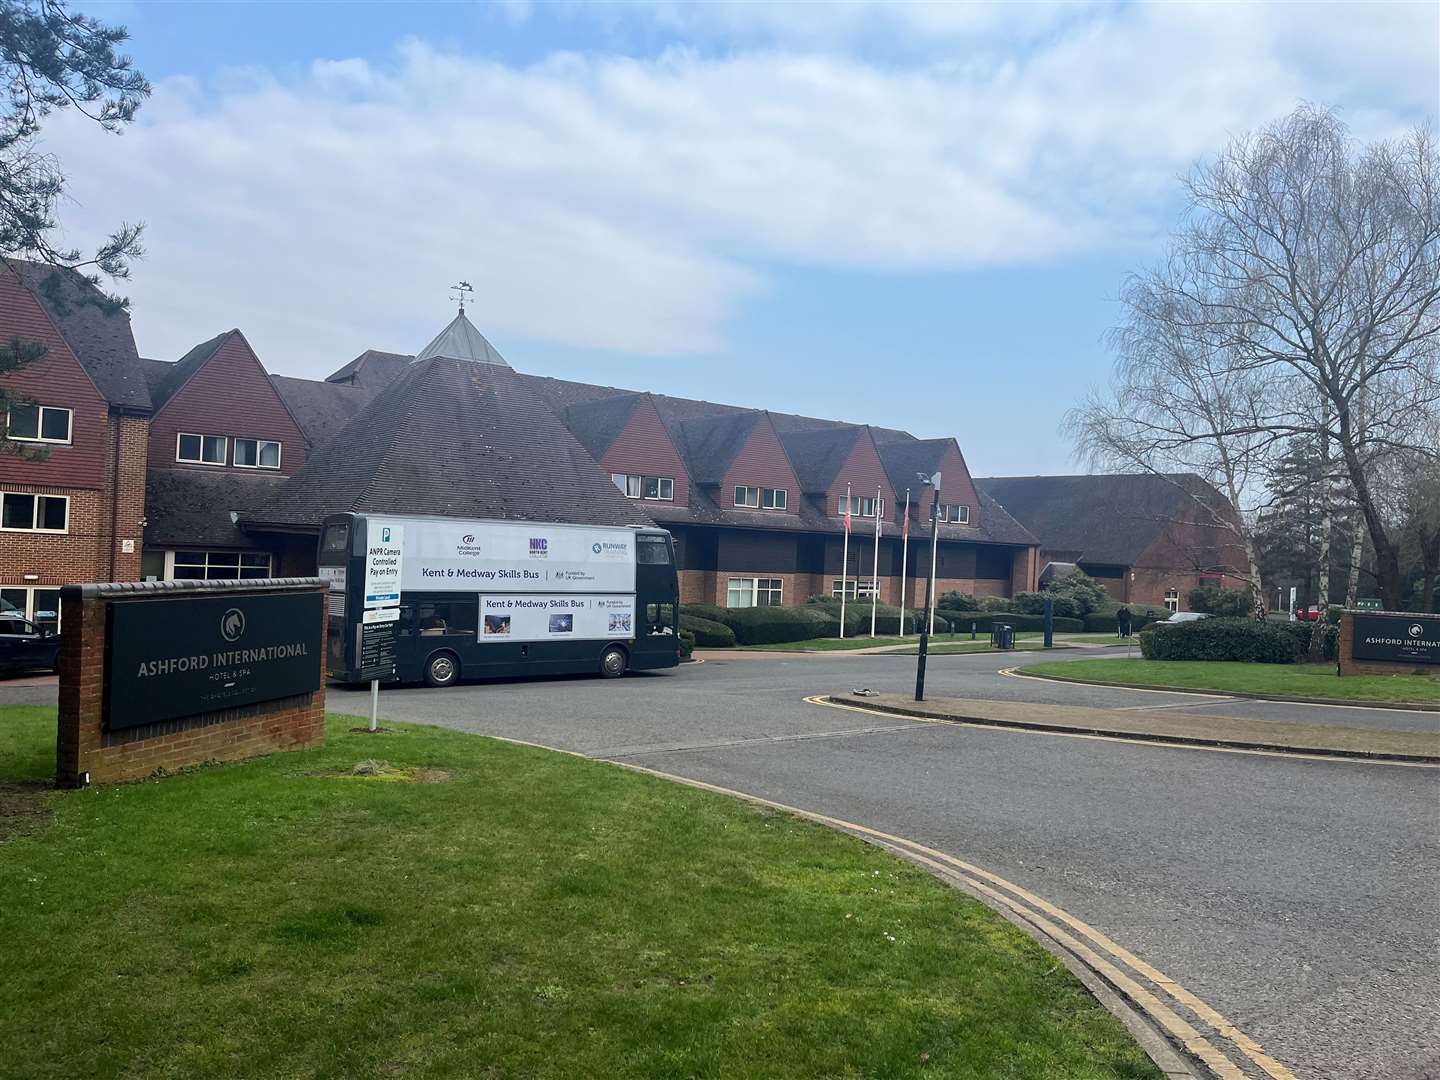 Police were called to Ashford International Hotel this morning